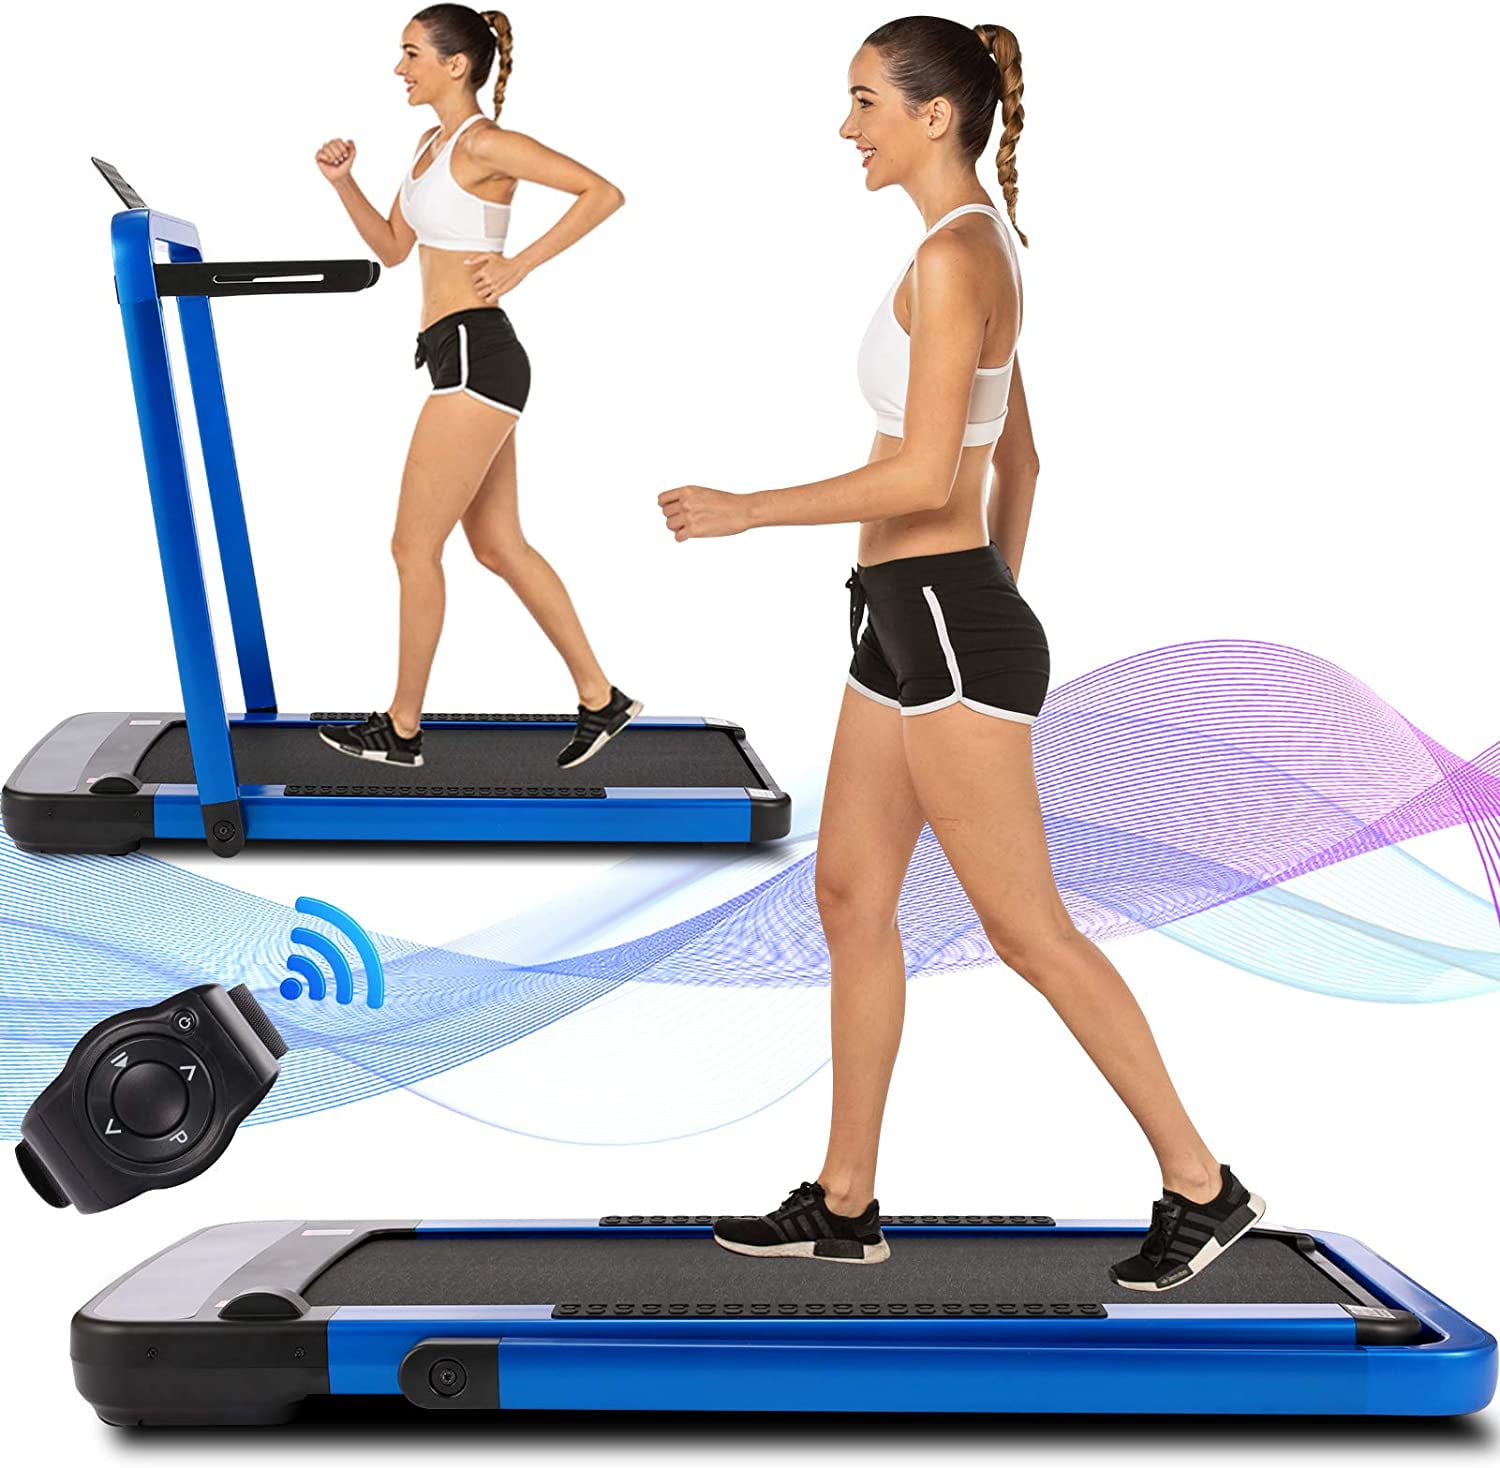 Smart Walking Running Machine with Bluetooth Audio Speakers Bifanuo 2 in 1 Folding Treadmill Installation-Free，Under Desk Treadmill for Home/Office Gym Cardio Fitness